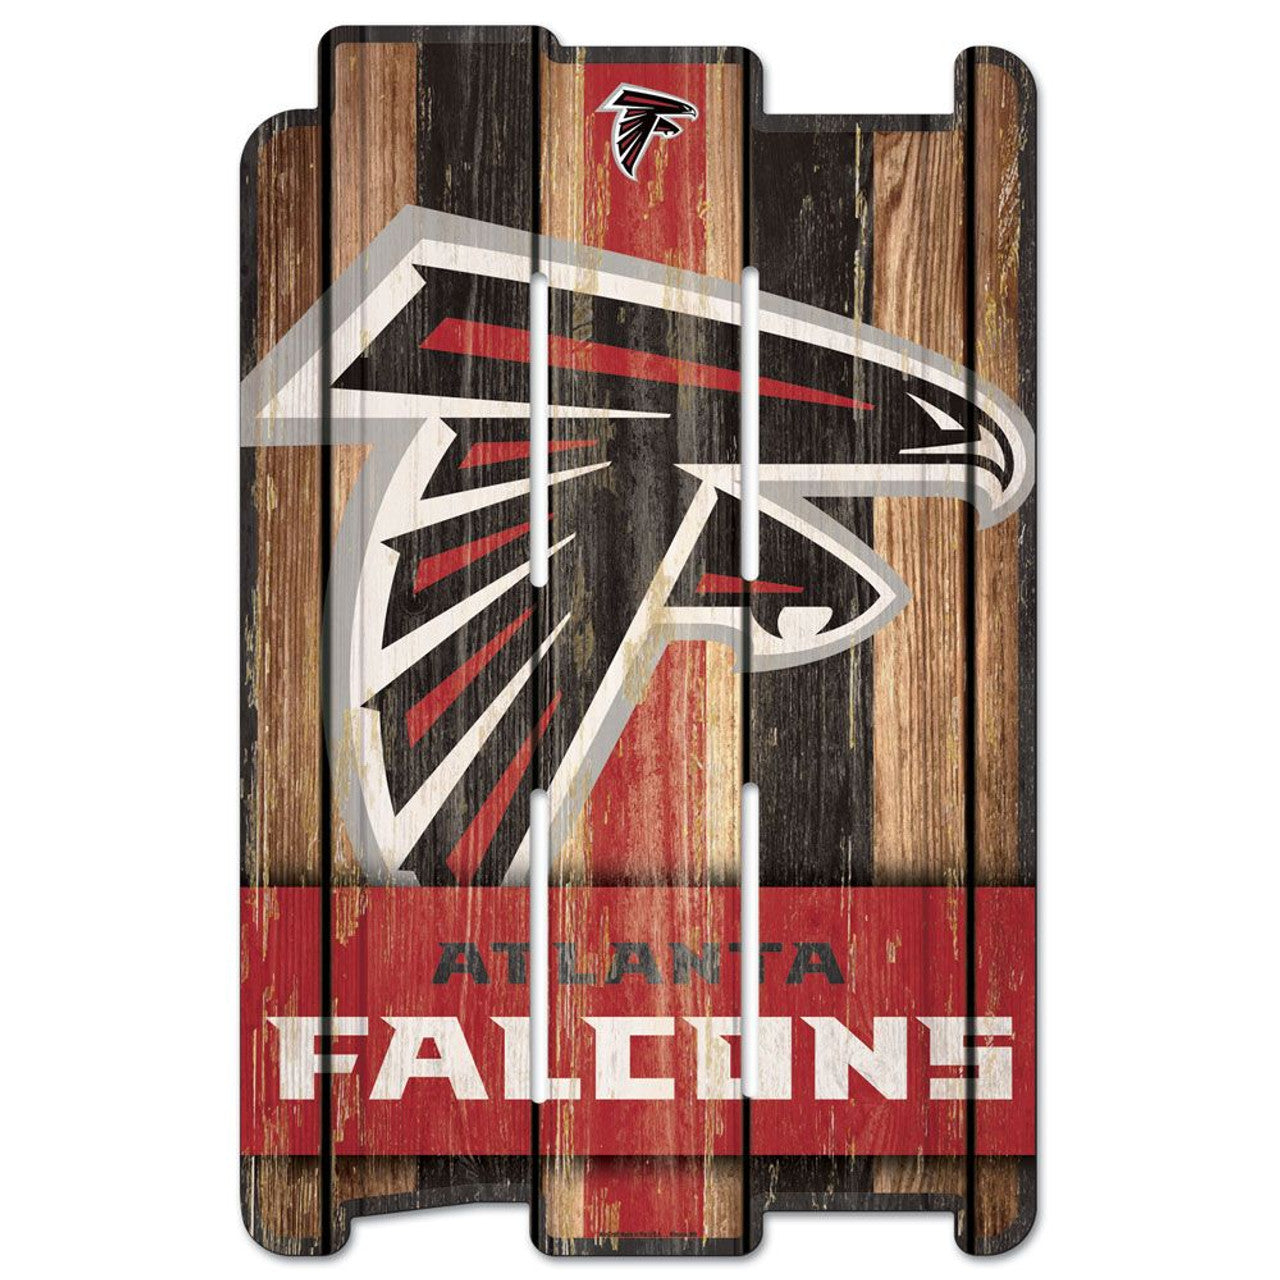 Atlanta Falcons Wood Fence Sign - 11" x 17" with team colors and graphics. Routed hanging hole for easy mounting. Officially licensed, made in the USA by Wincraft.